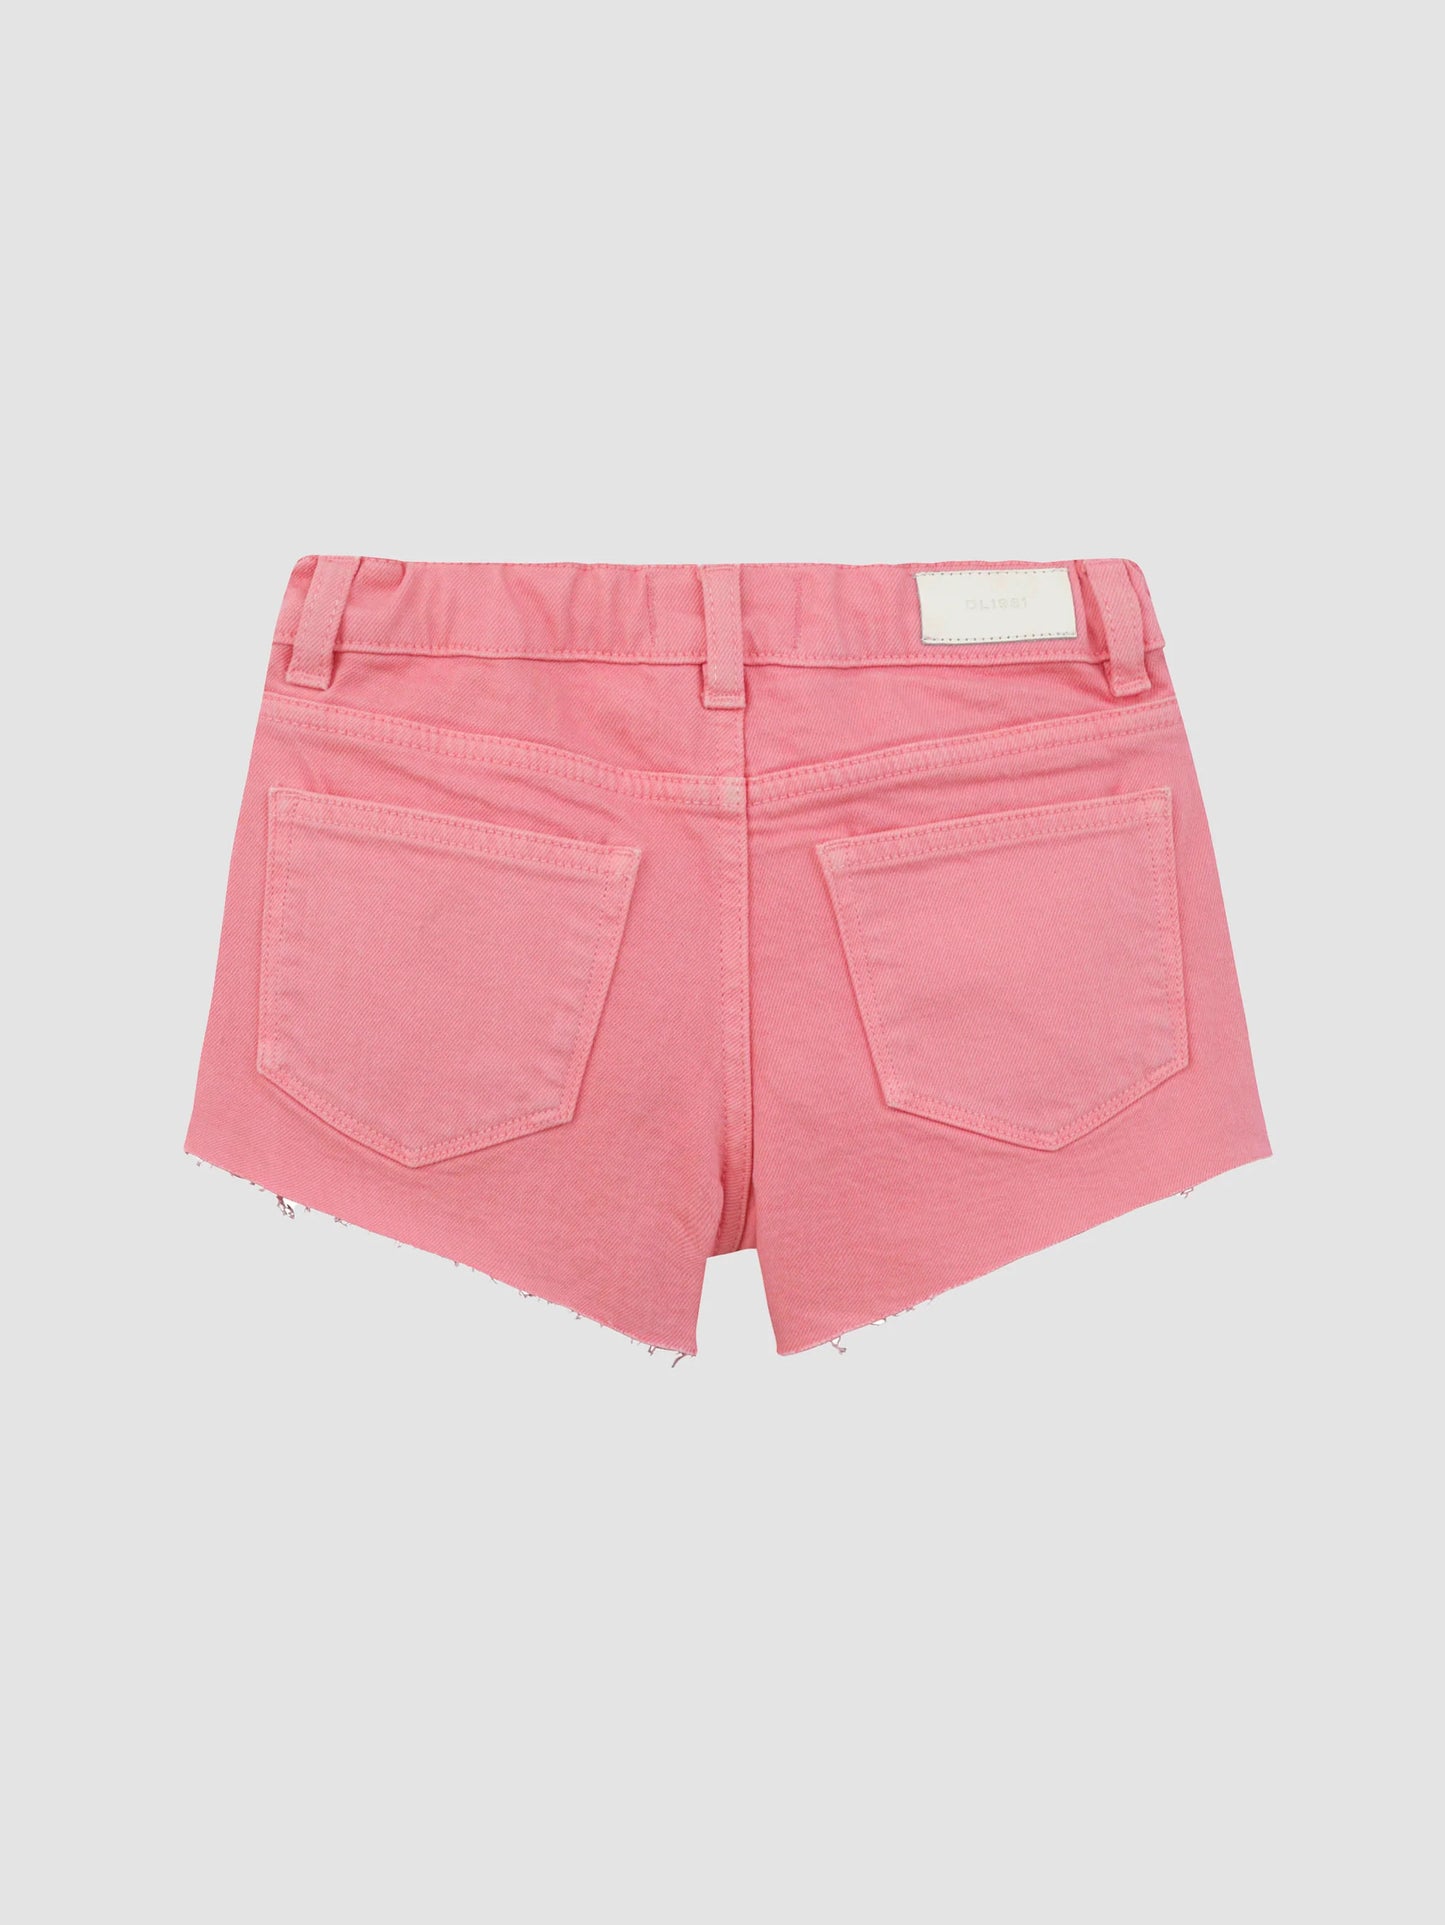 DL1961 Lucy Jean Shorts Cut Off_ 27124